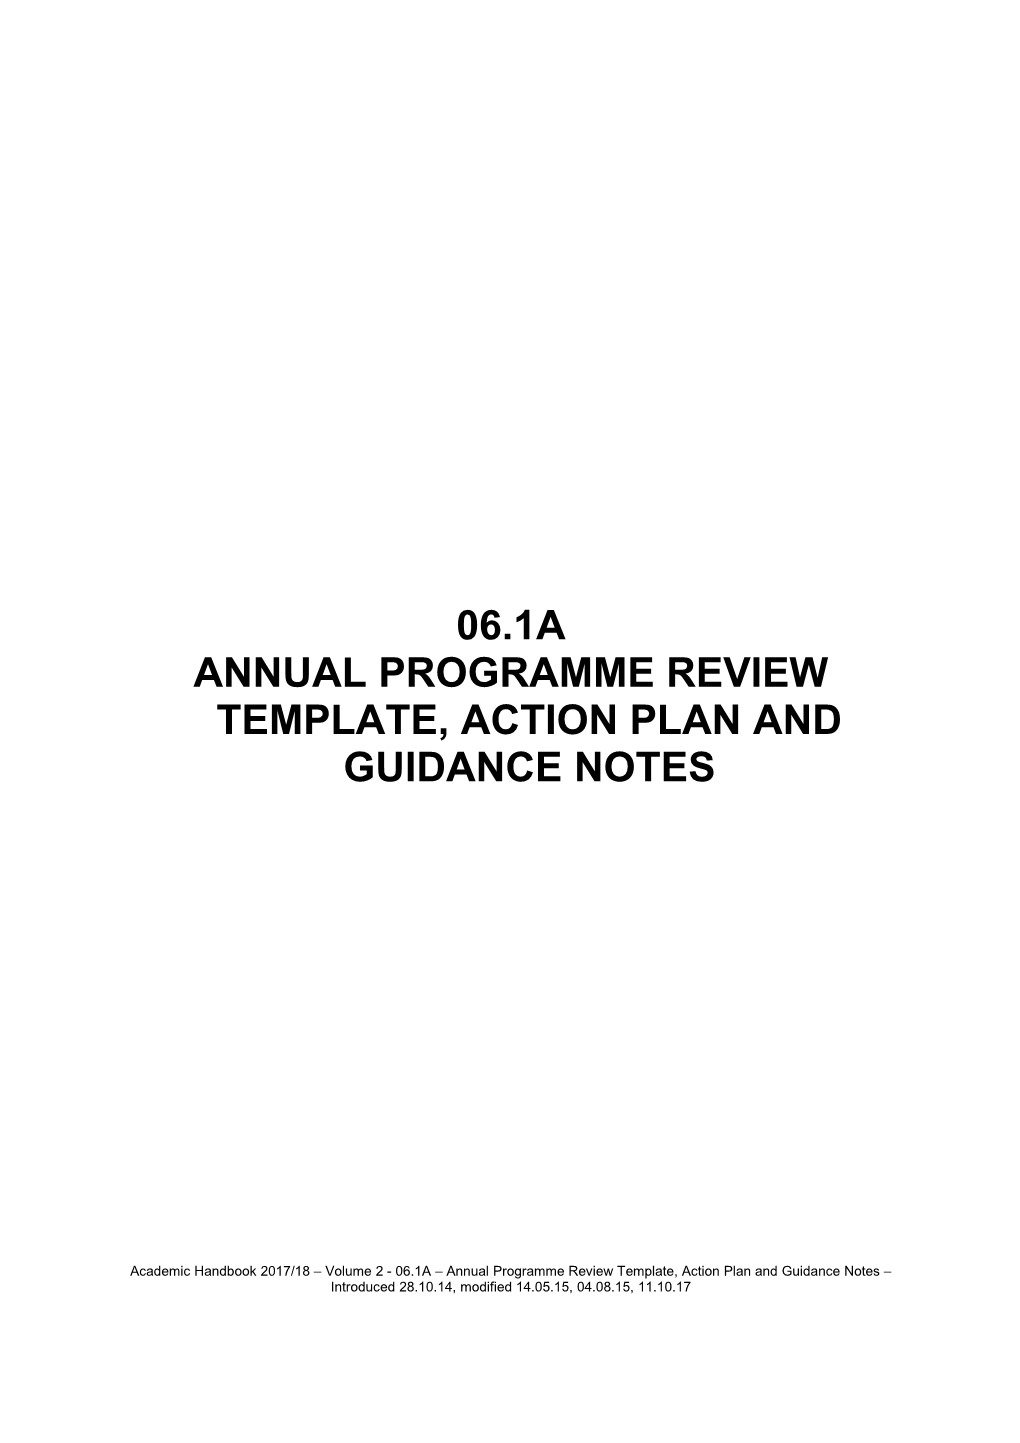 Annual Programme Review Template, ACTION PLAN and GUIDANCE NOTES